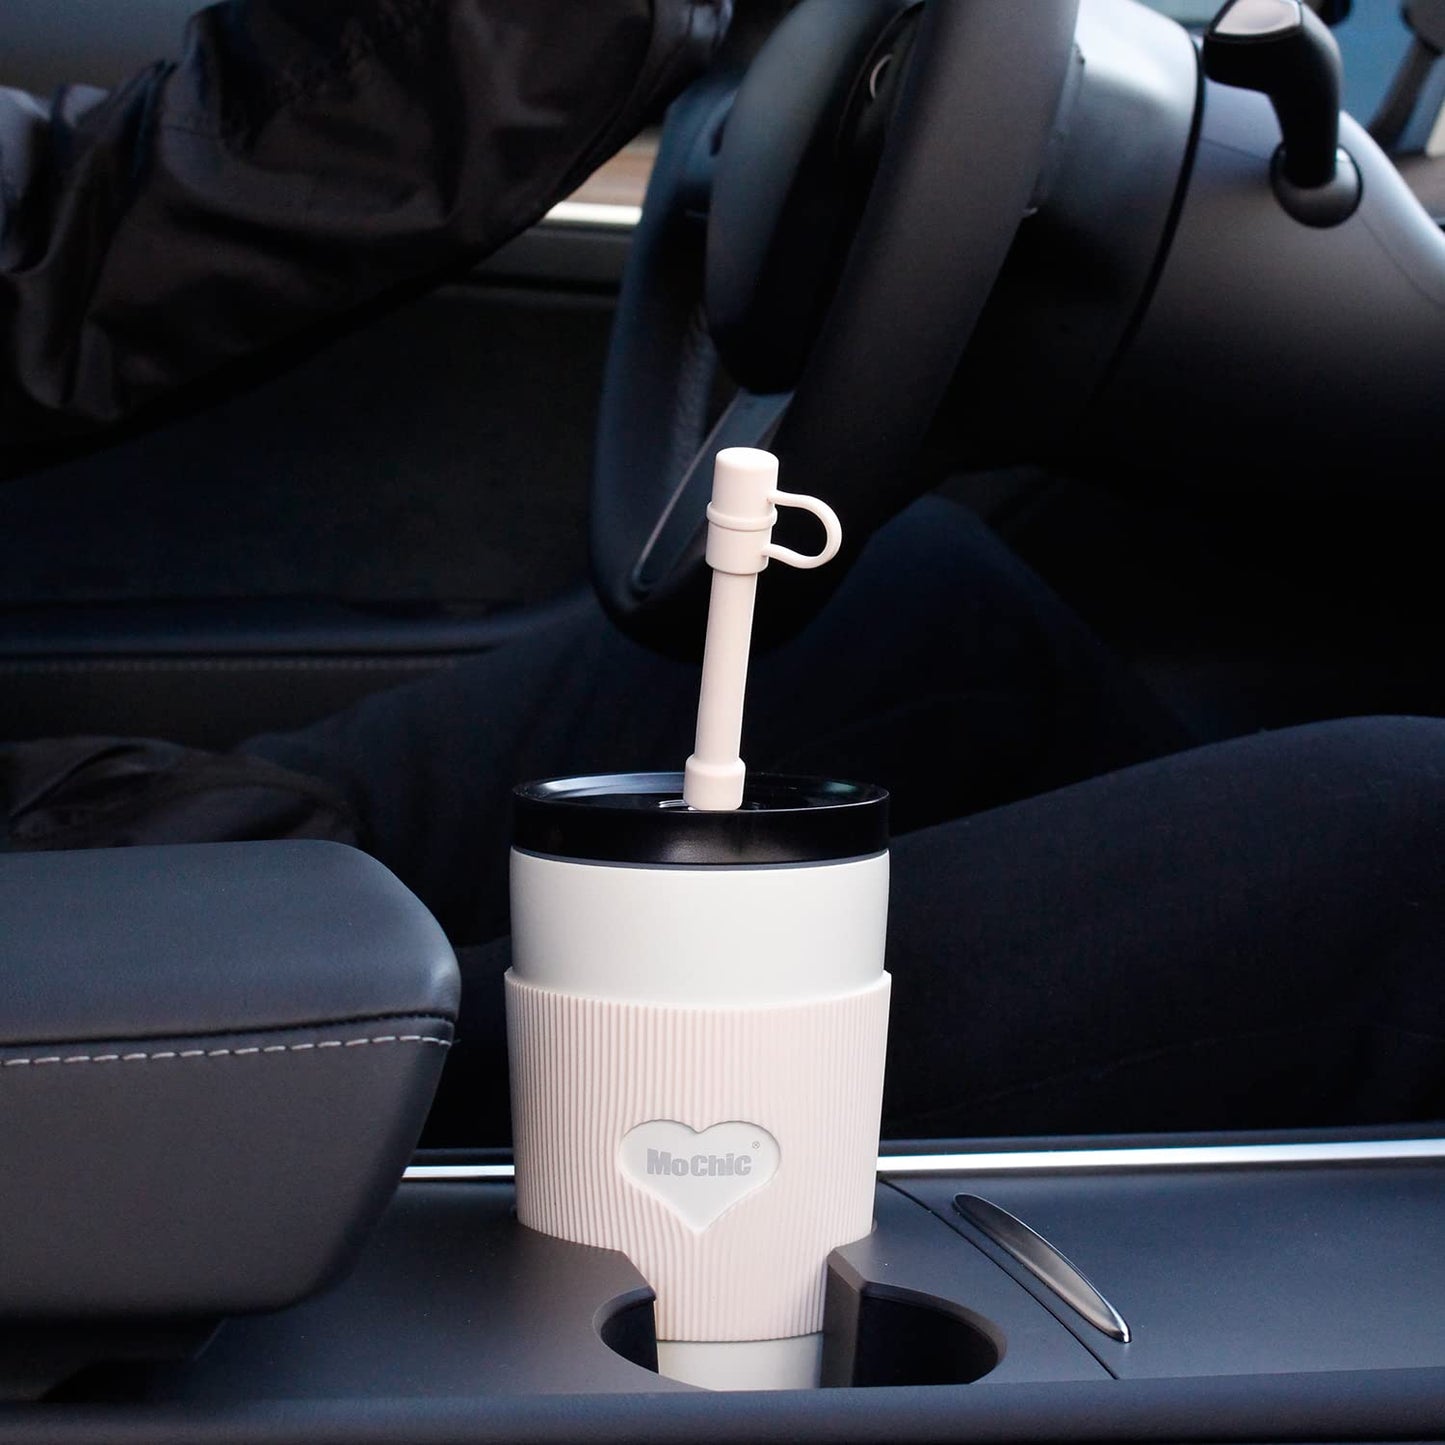 16oz LED Temperature Display Cup with Straw Lid - White